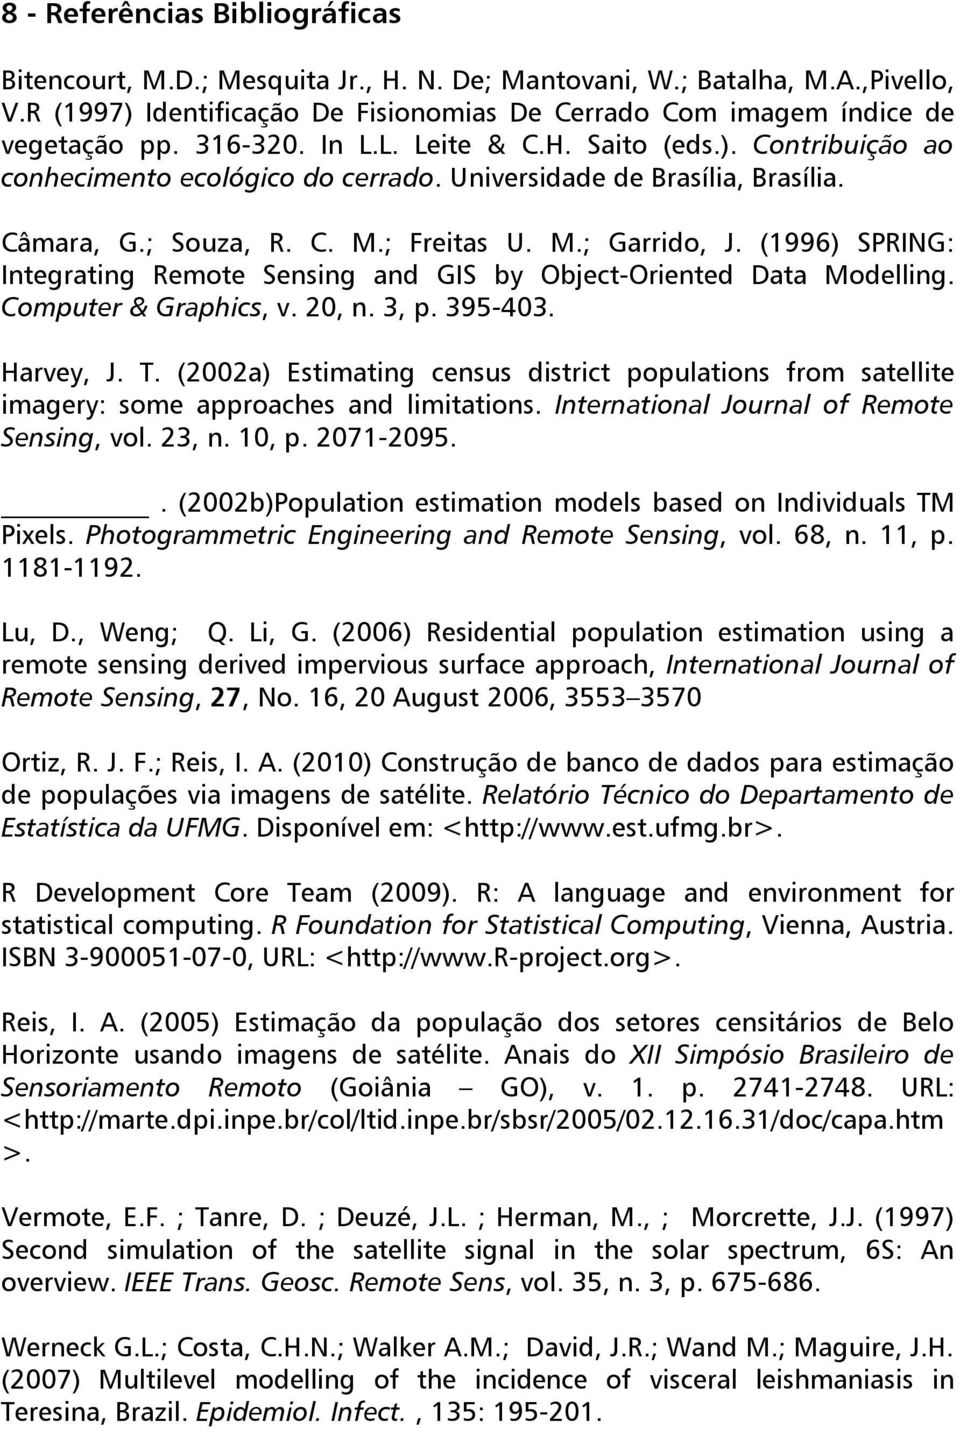 (1996) SPRING: Integrating Remote Sensing and GIS by Object-Oriented Data Modelling. Computer & Graphics, v. 20, n. 3, p. 395-403. Harvey, J. T.